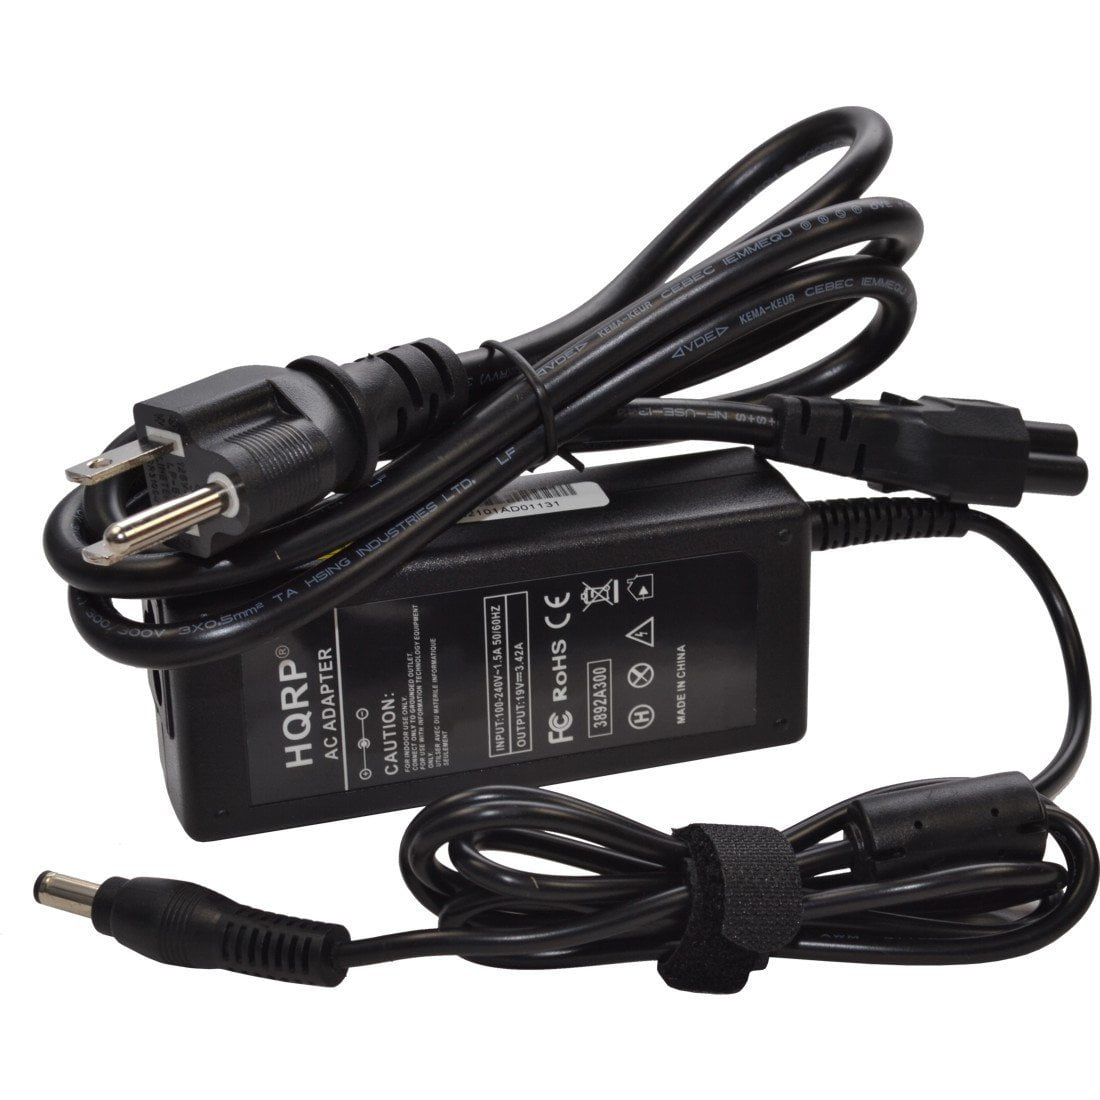 Accessory USA 19VDC AC/DC Adapter for PetSafe IF-100 PIF-300 300-034 RFA-443 IF-101 Pet Containment Fence Transmitter Radio Systems SPS-06C19-1W-US-BR 650-231 SPS-06C19-1W-E 650-297 NOT 14VAC/12VDC